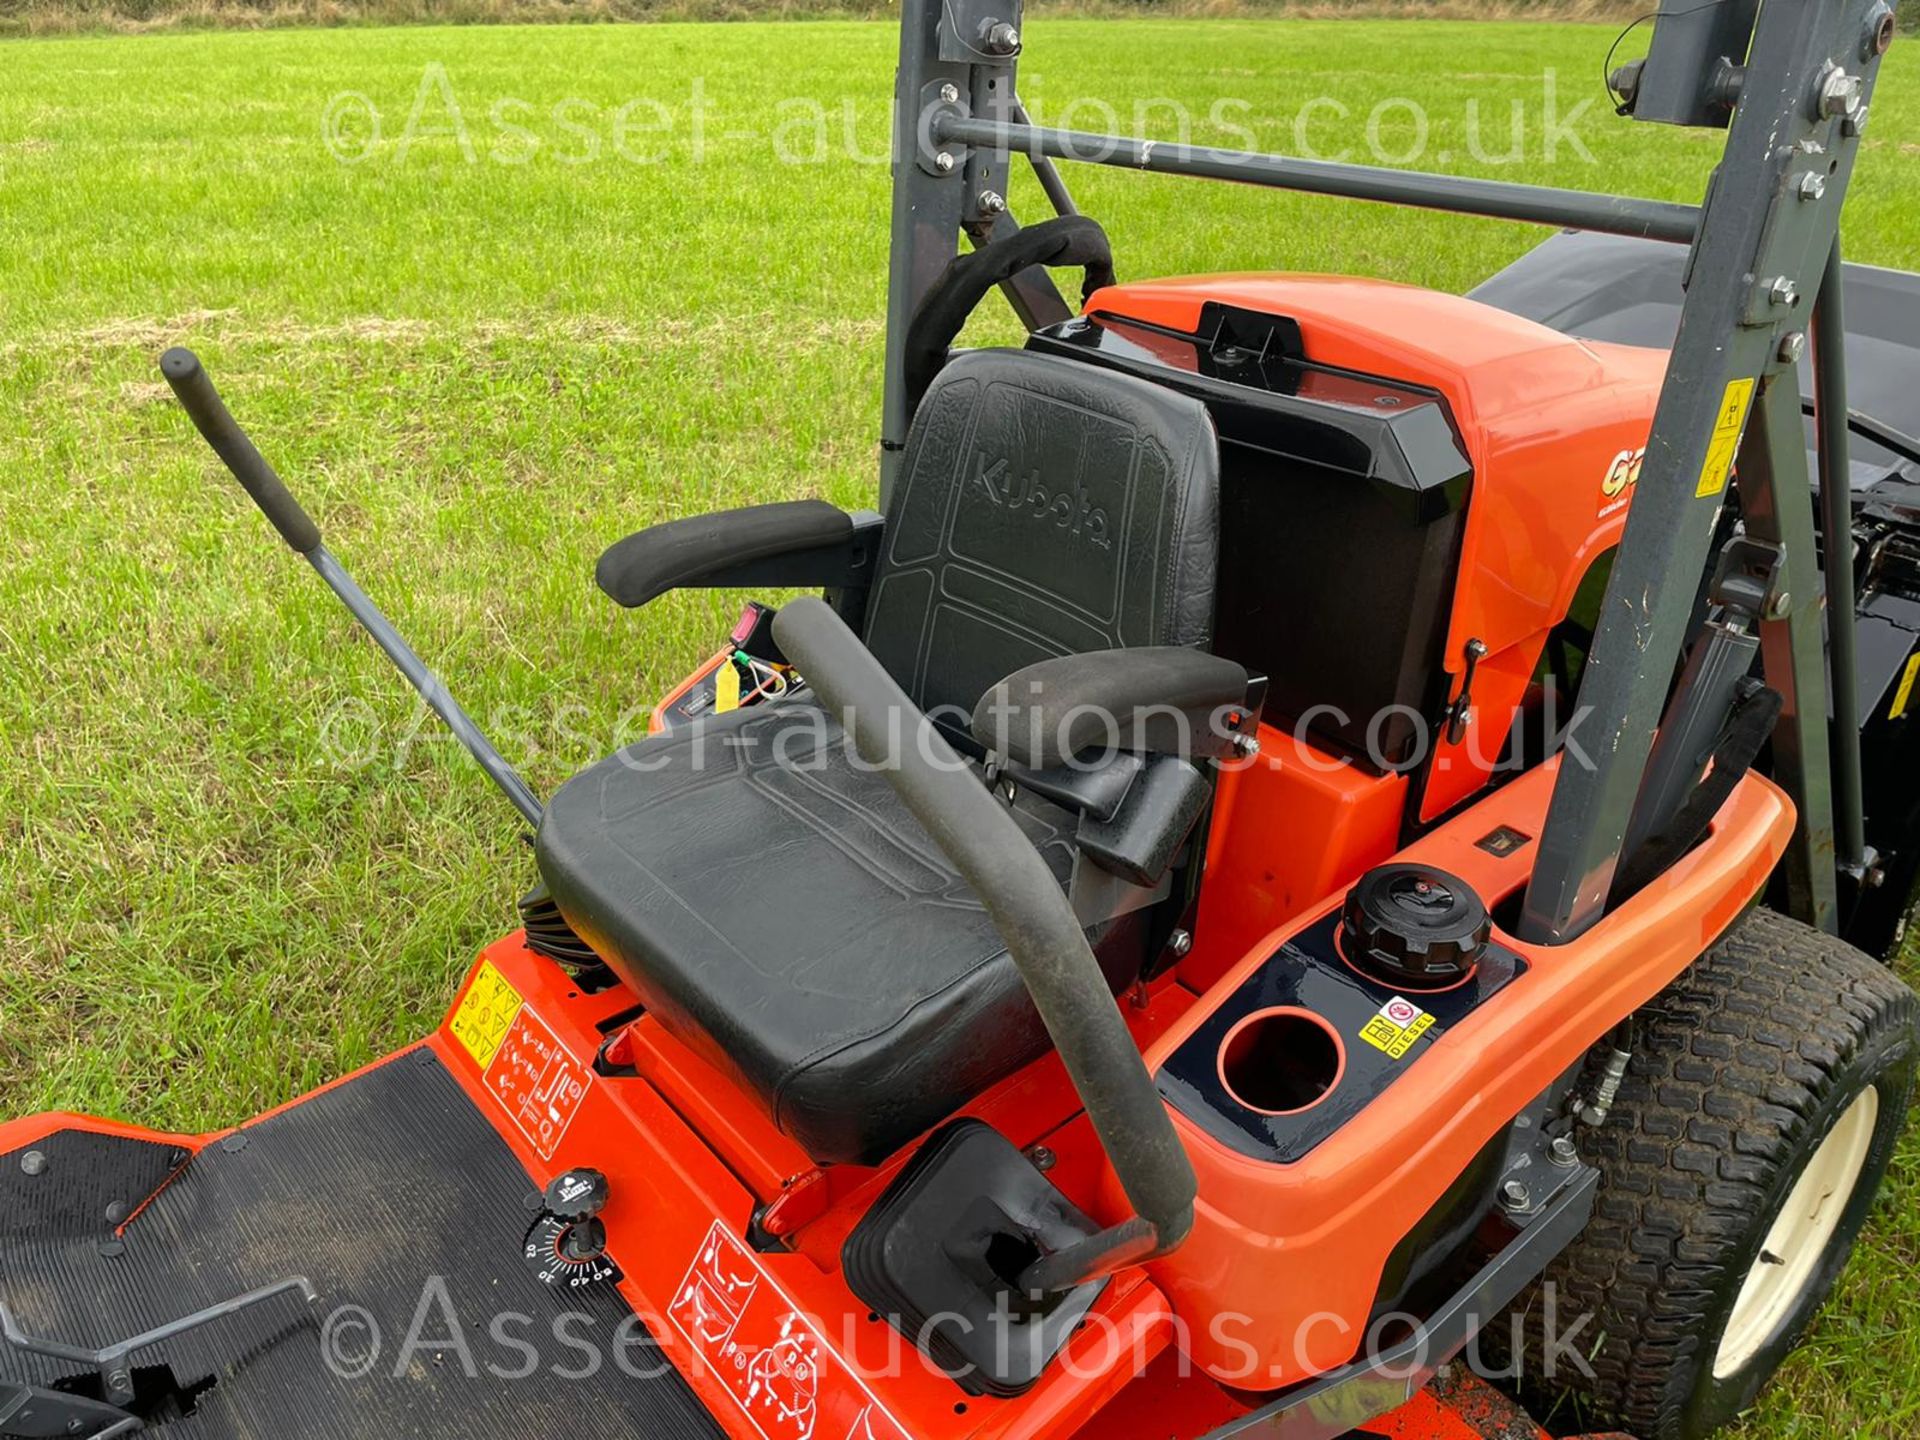 2015 KUBOTA GZD21 HIGH TIP ZERO TURN MOWER, RUNS, DRIVES CUTS AND COLLECTS WELL *PLUS VAT* - Image 23 of 26